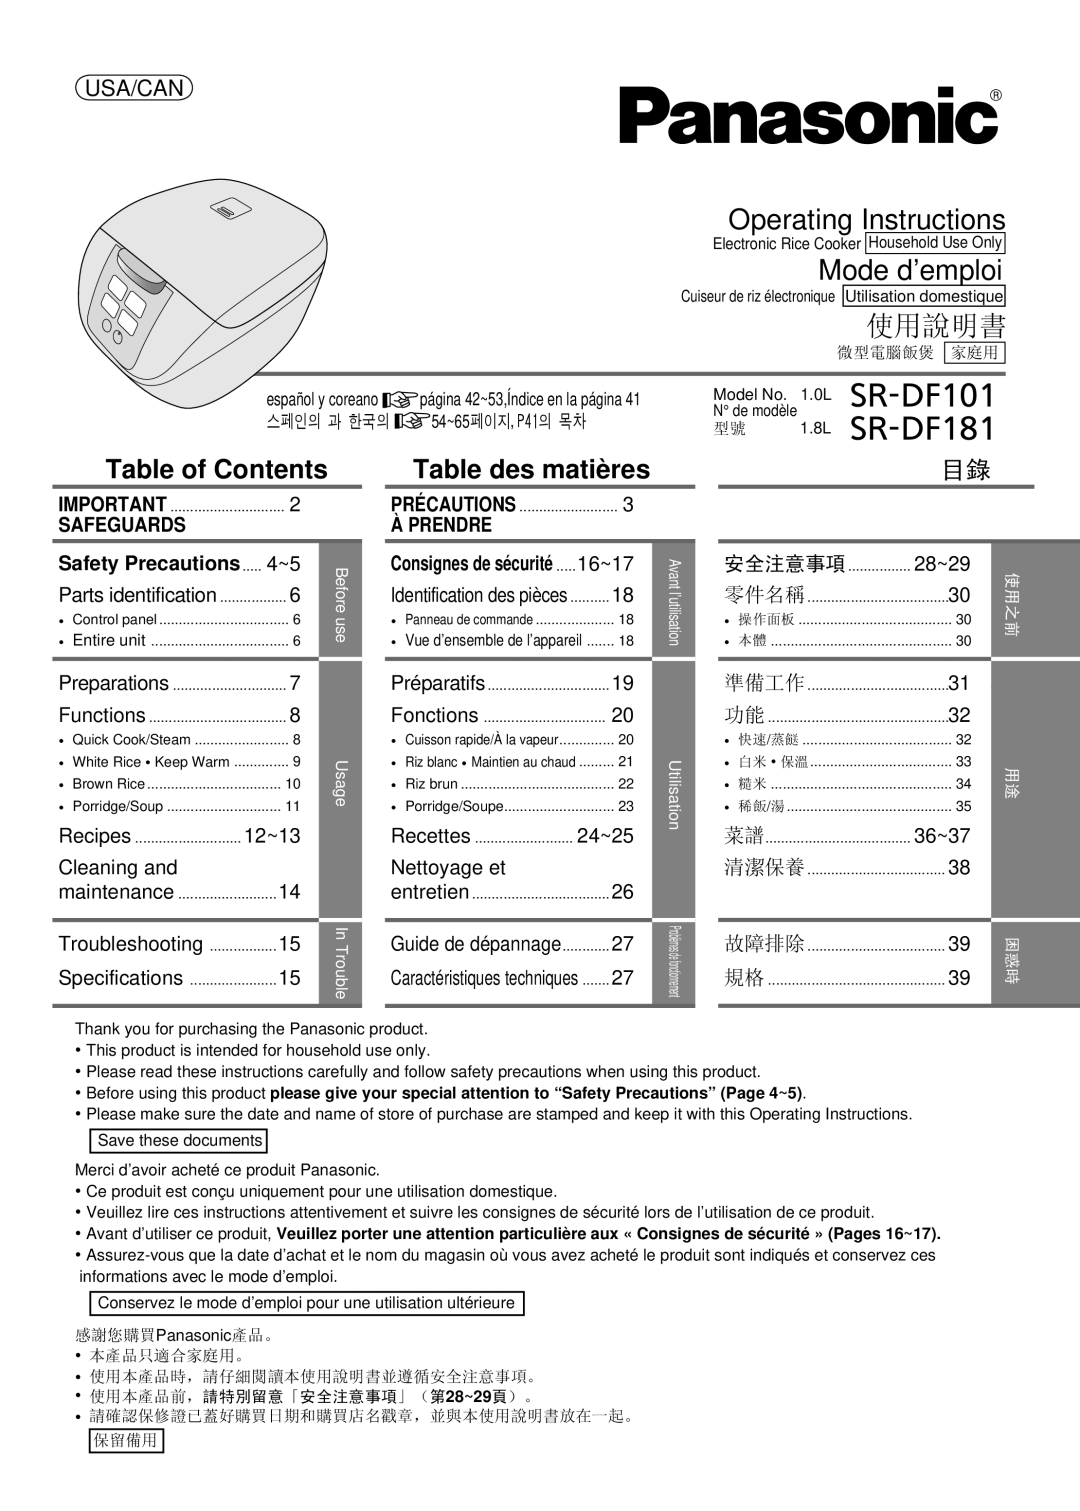 Panasonic SR/DF181 specifications Operating Instructions, Mode d’emploi, 使用說明書, 型號 1.8L SR-DF181, Table of Contents 